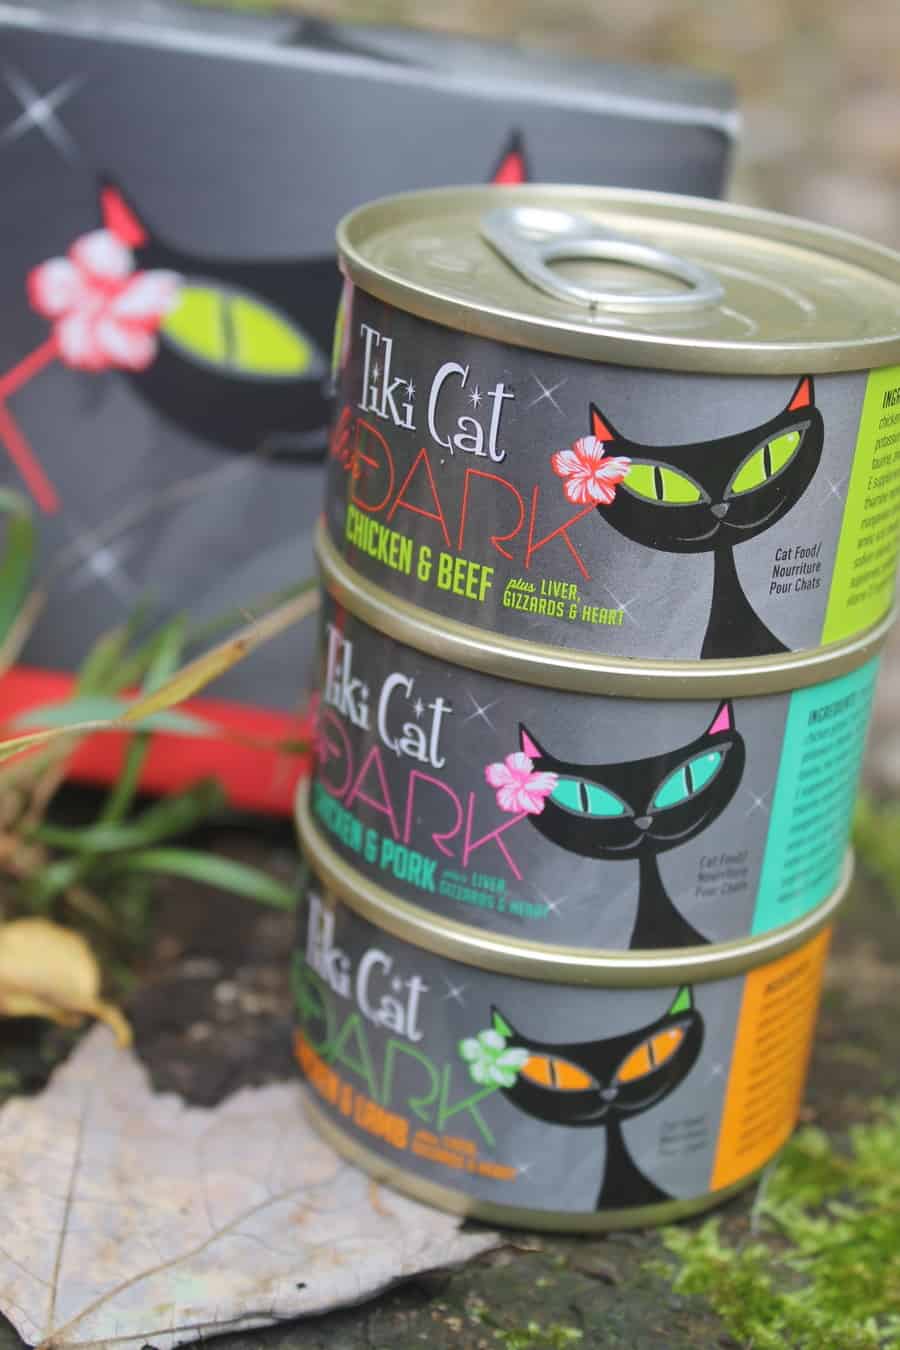 Satisfy Your Cat's Craving for Something New with Tiki Cat After Dark